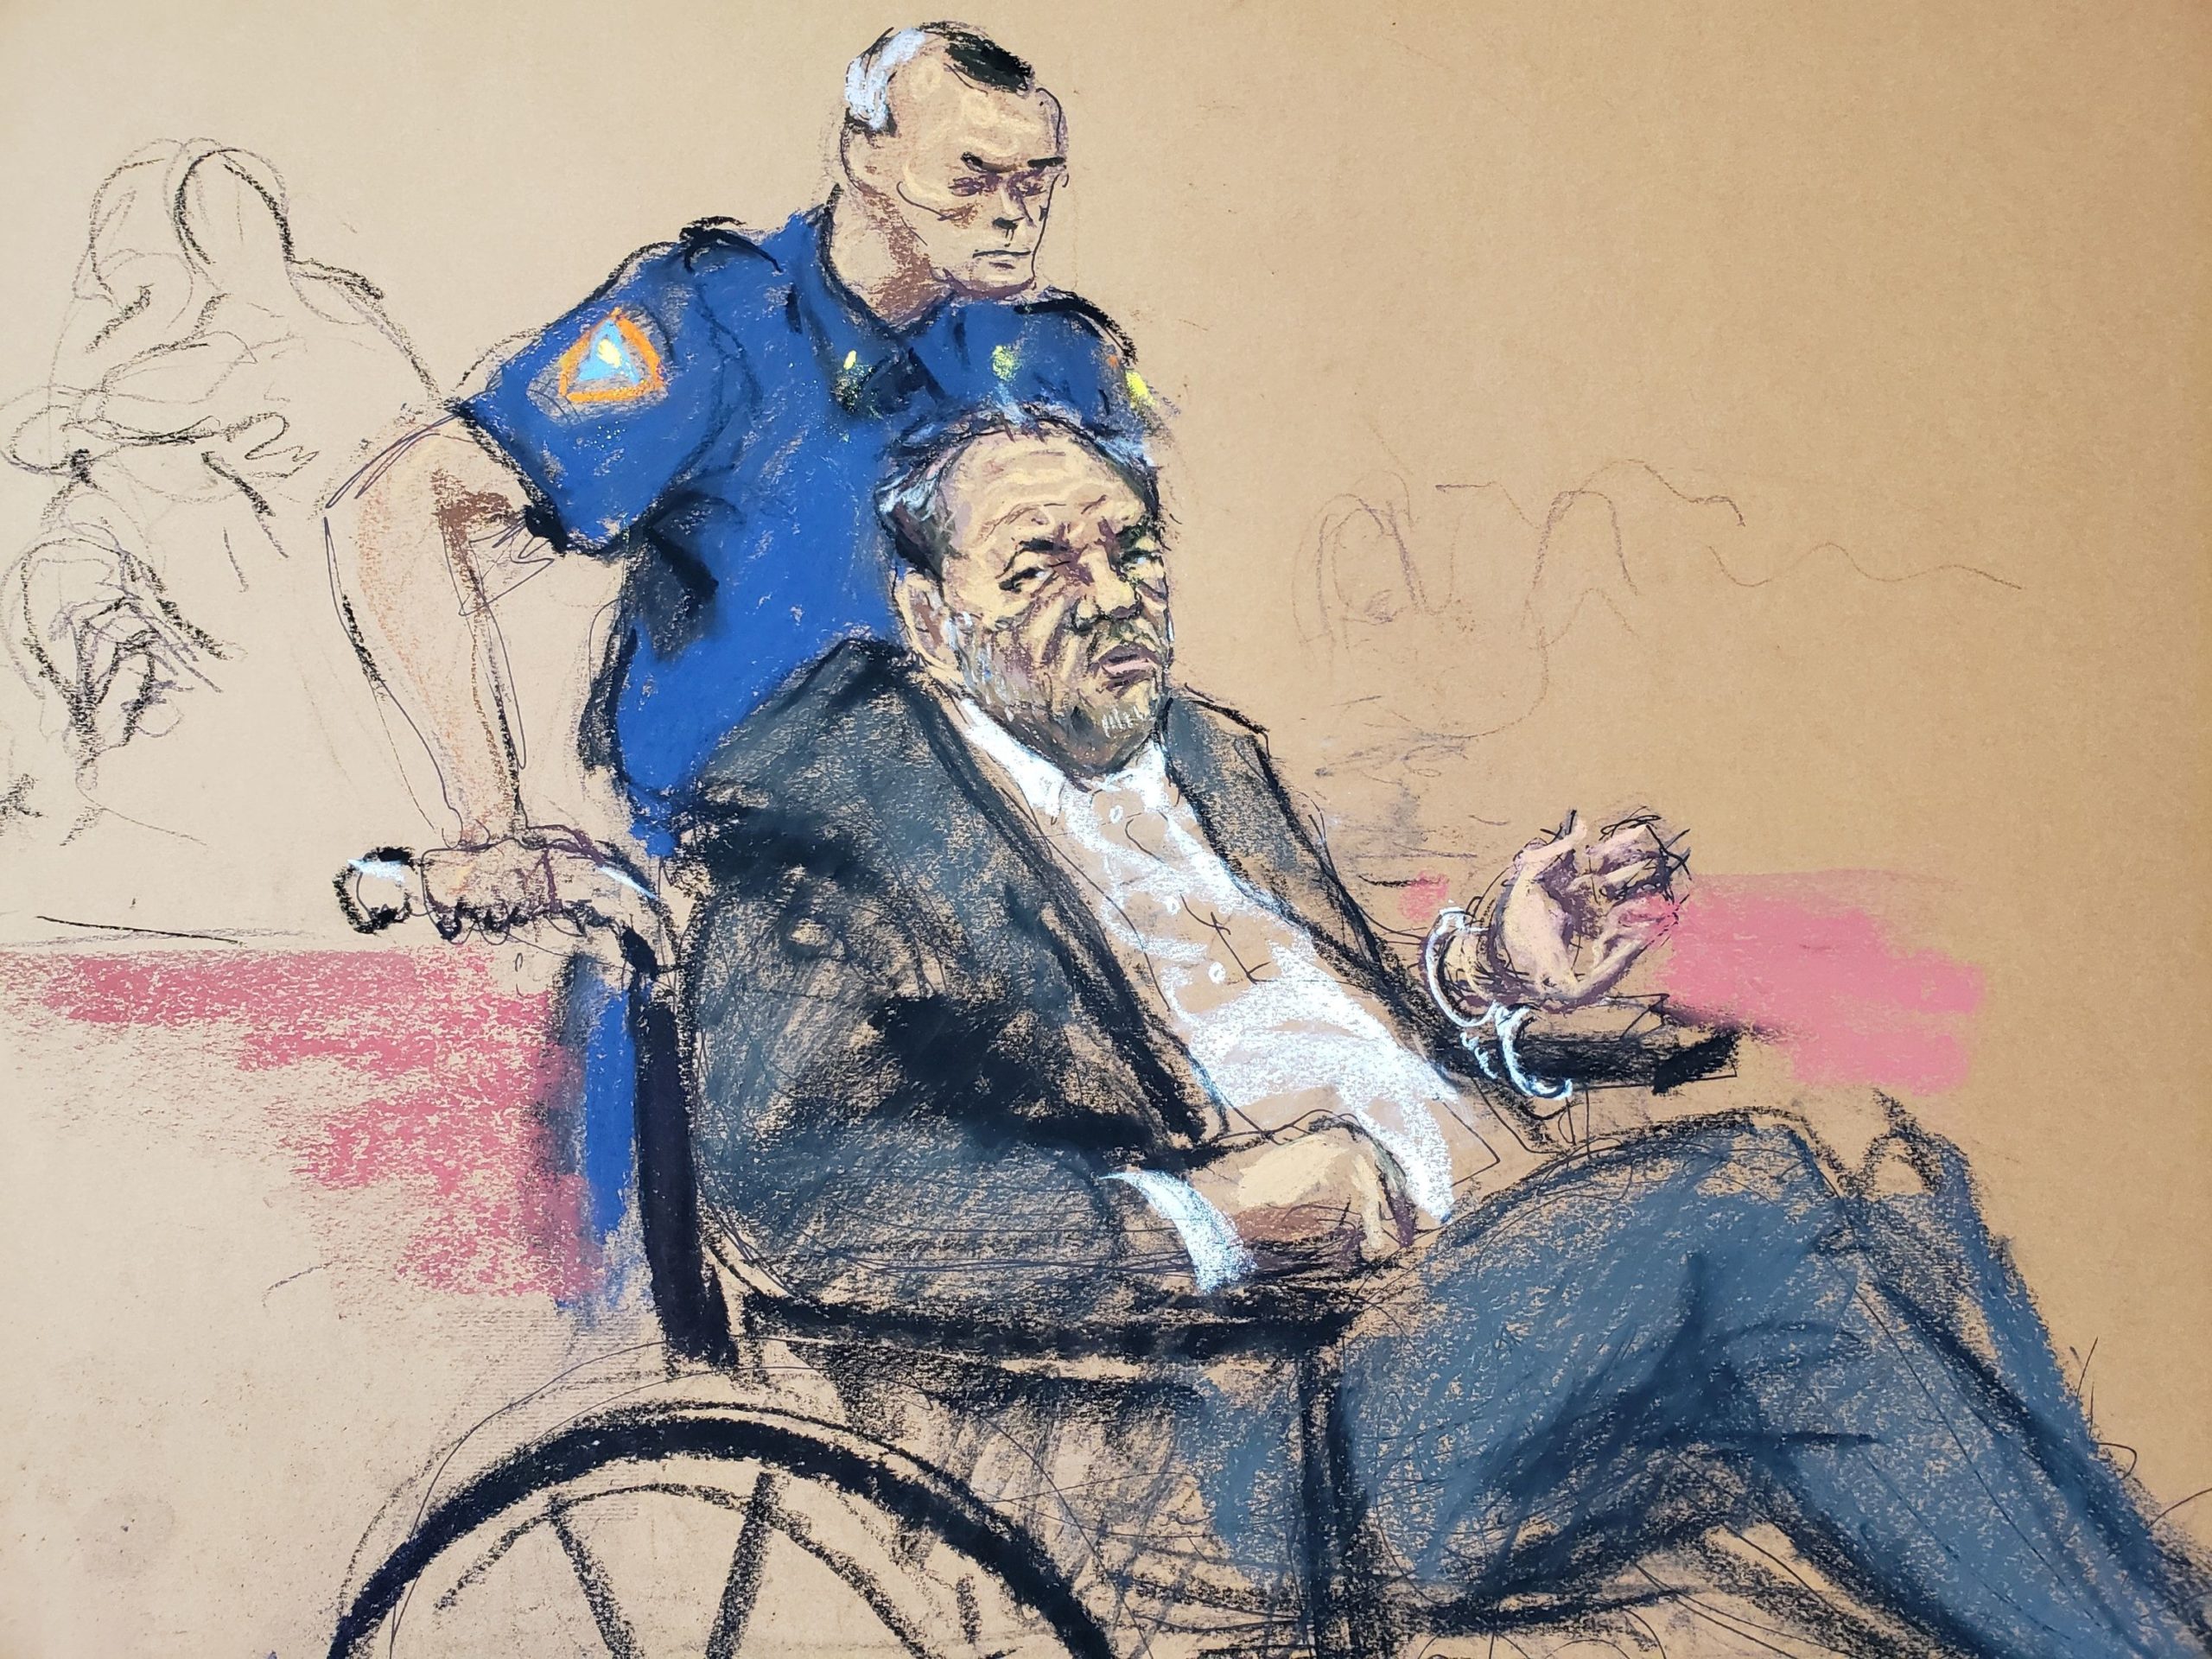 Harvey Weinstein sits in a wheelchair during the sentencing following his conviction on sexual assault and rape charges in the Manhattan borough of New York City, New York, U.S. March 11, 2020 in this courtroom sketch. REUTERS/Jane Rosenberg